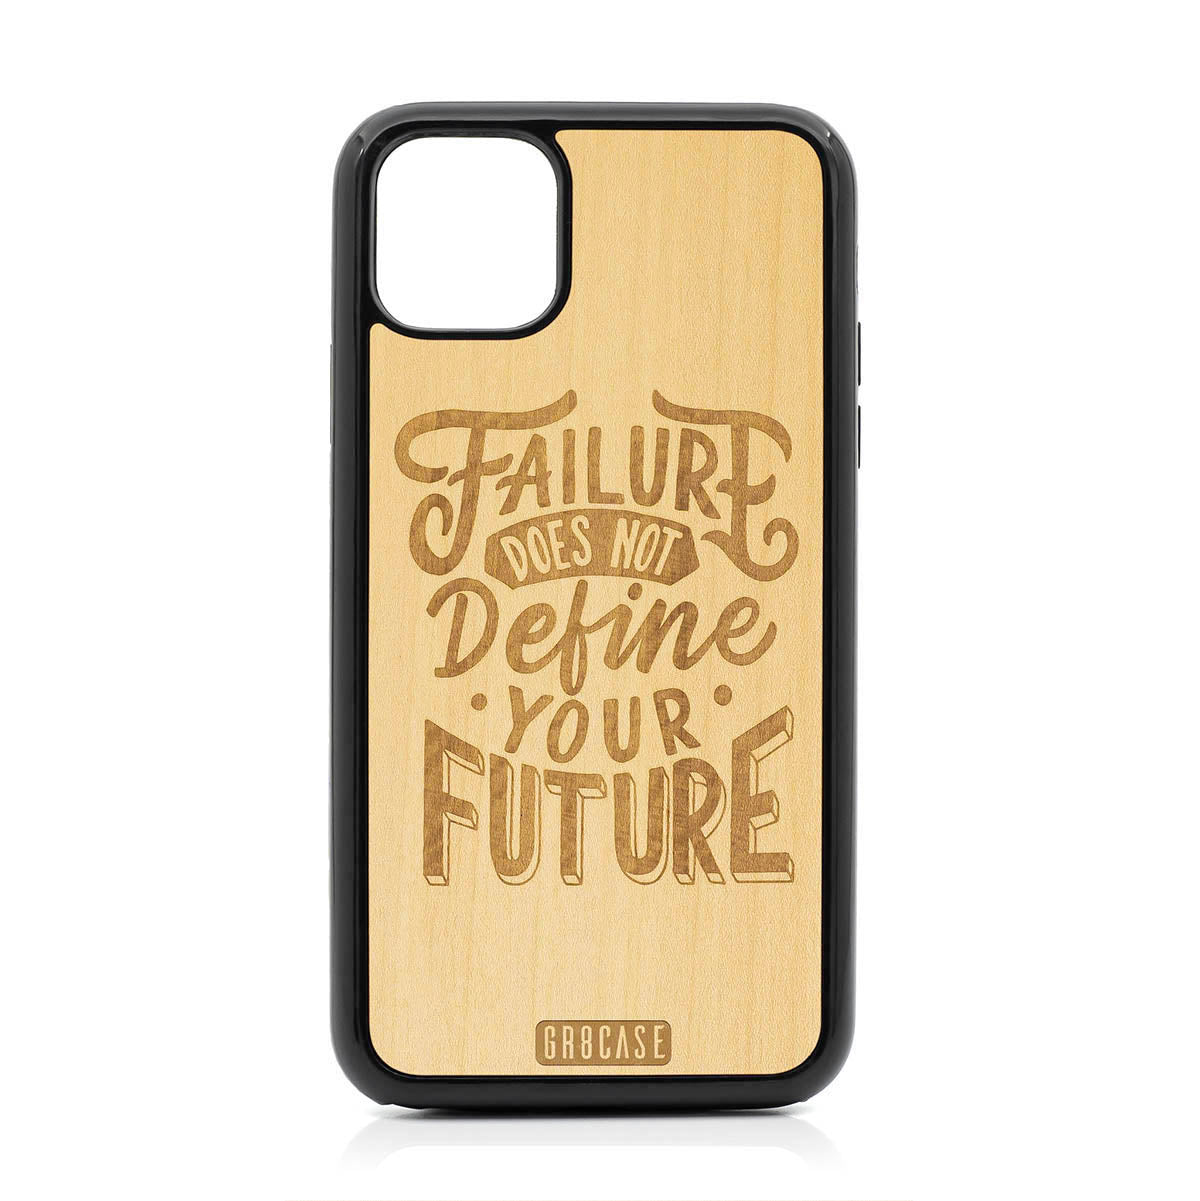 Failure Does Not Define You Future Design Wood Case For iPhone 11 Pro Max by GR8CASE